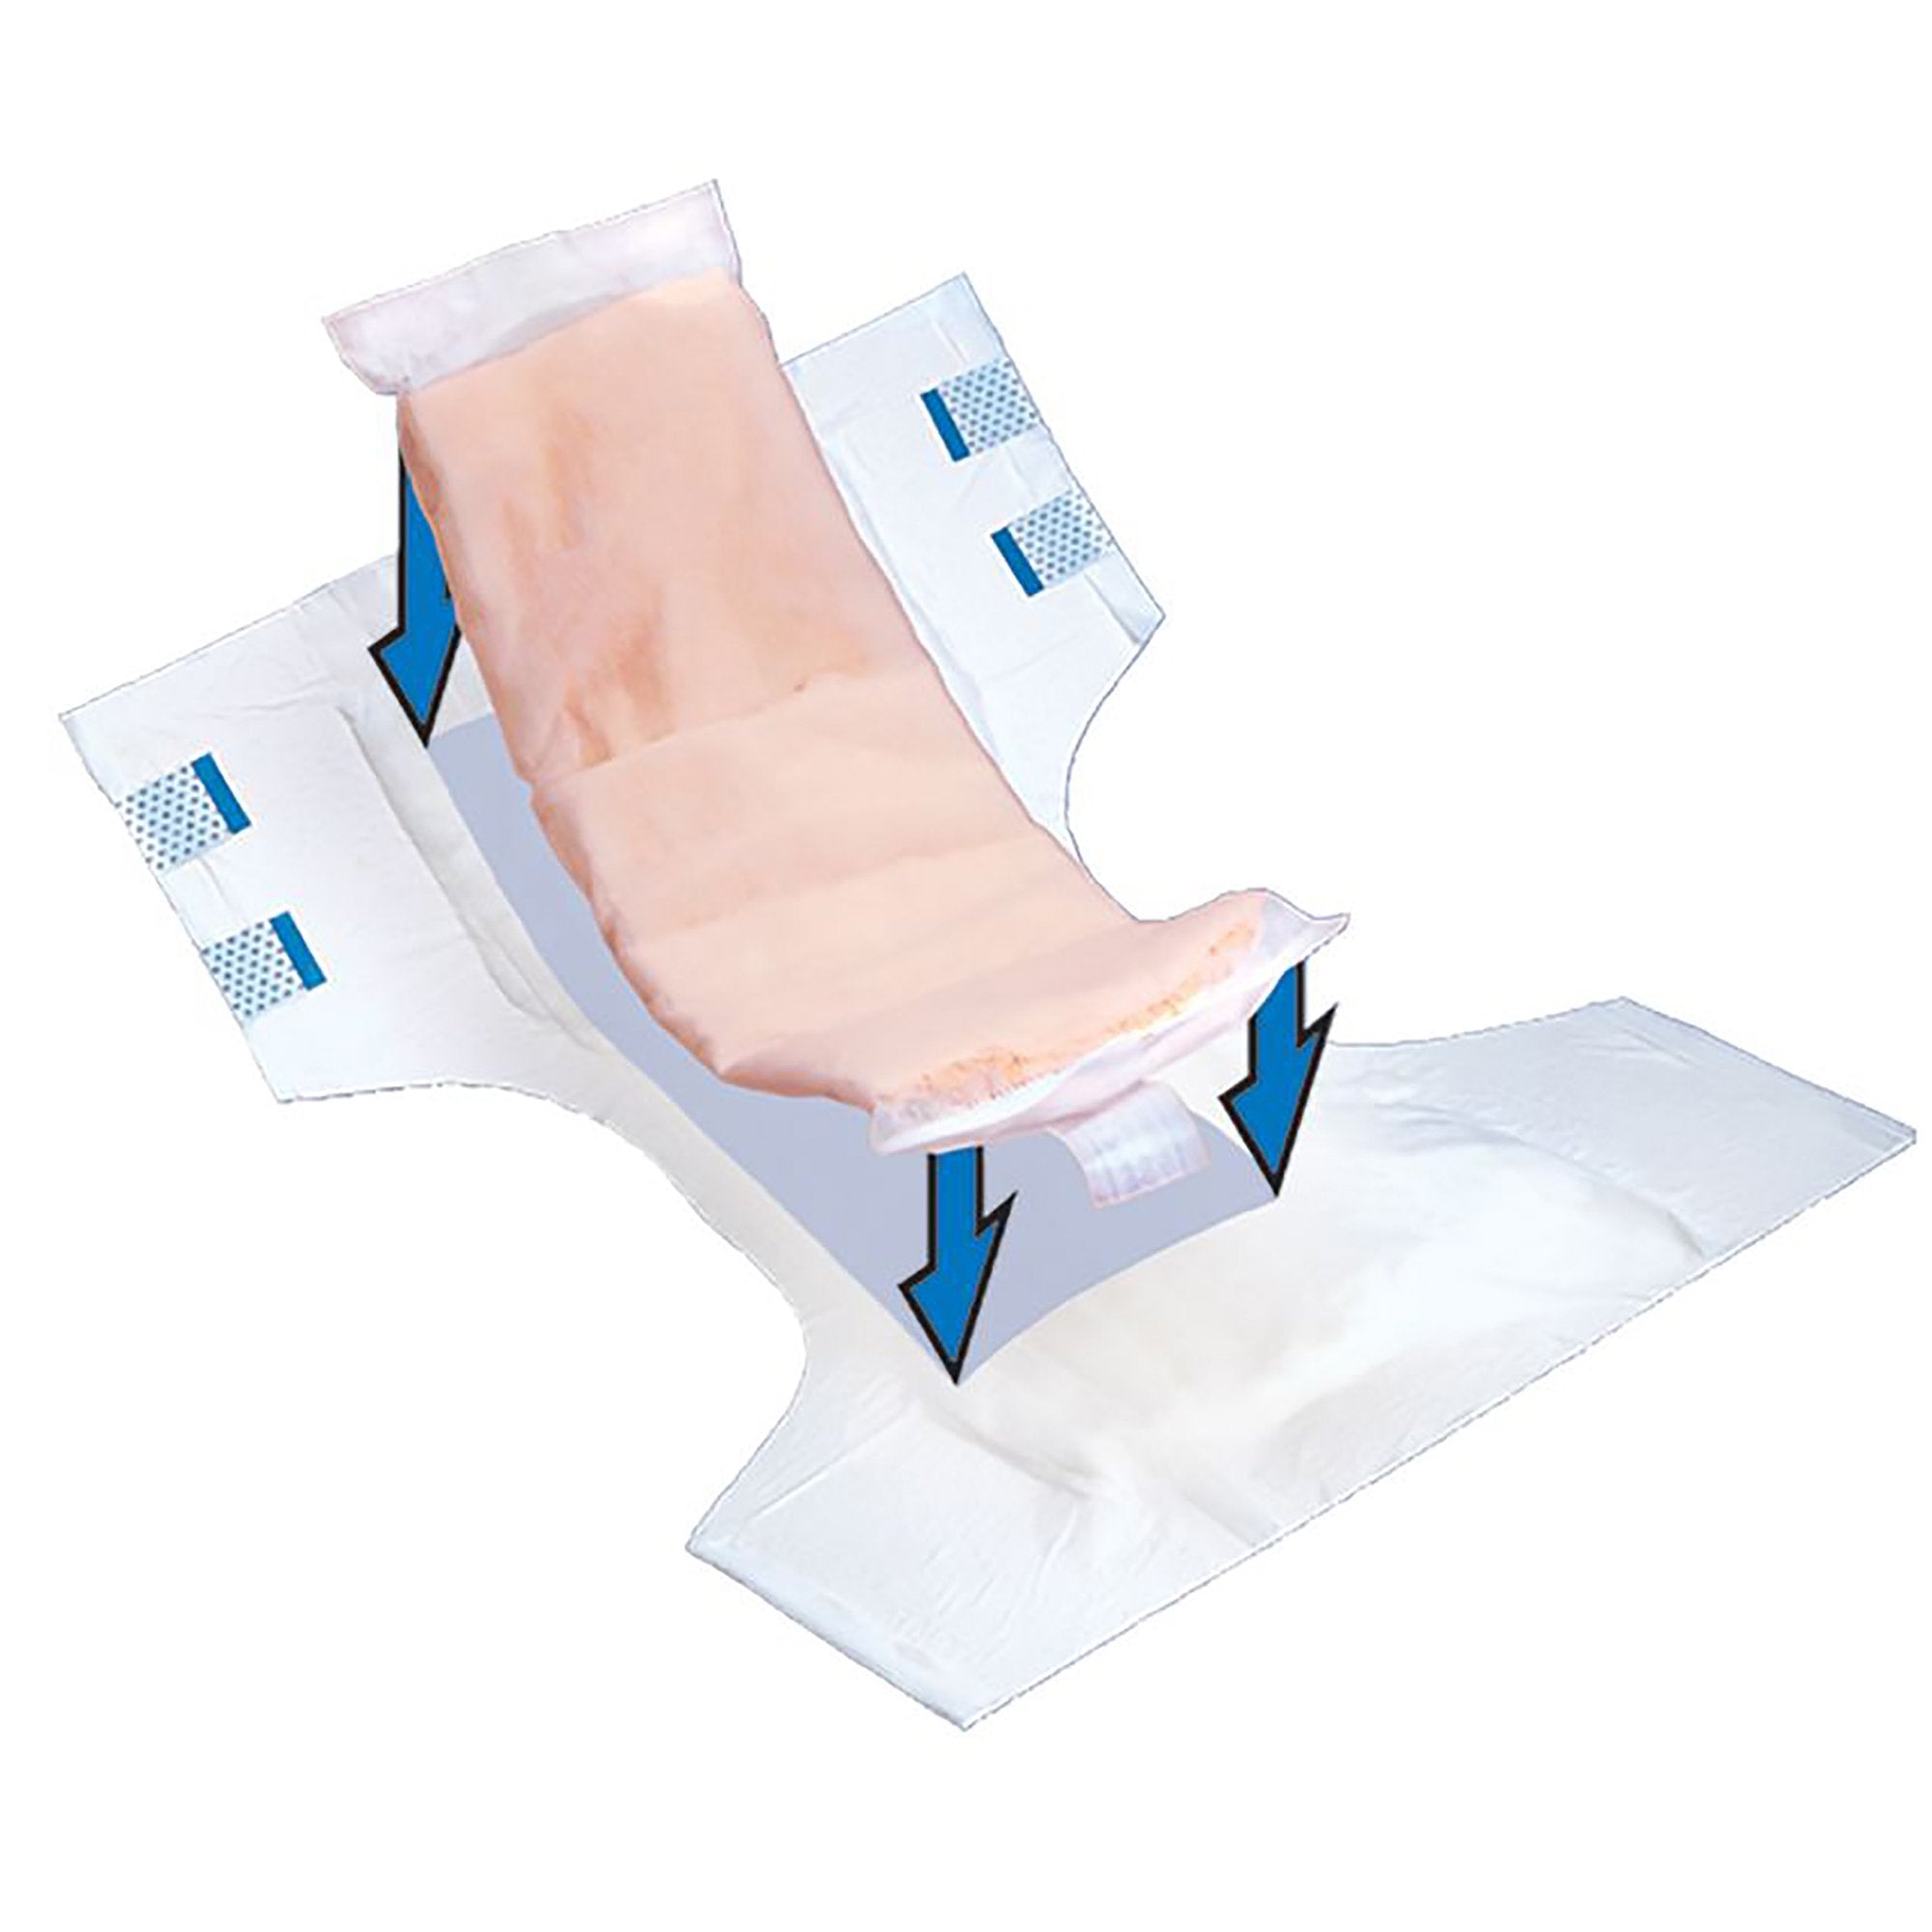 Tranquility? TopLiner? Incontinence Booster Pad, Unisex Disposable Pads